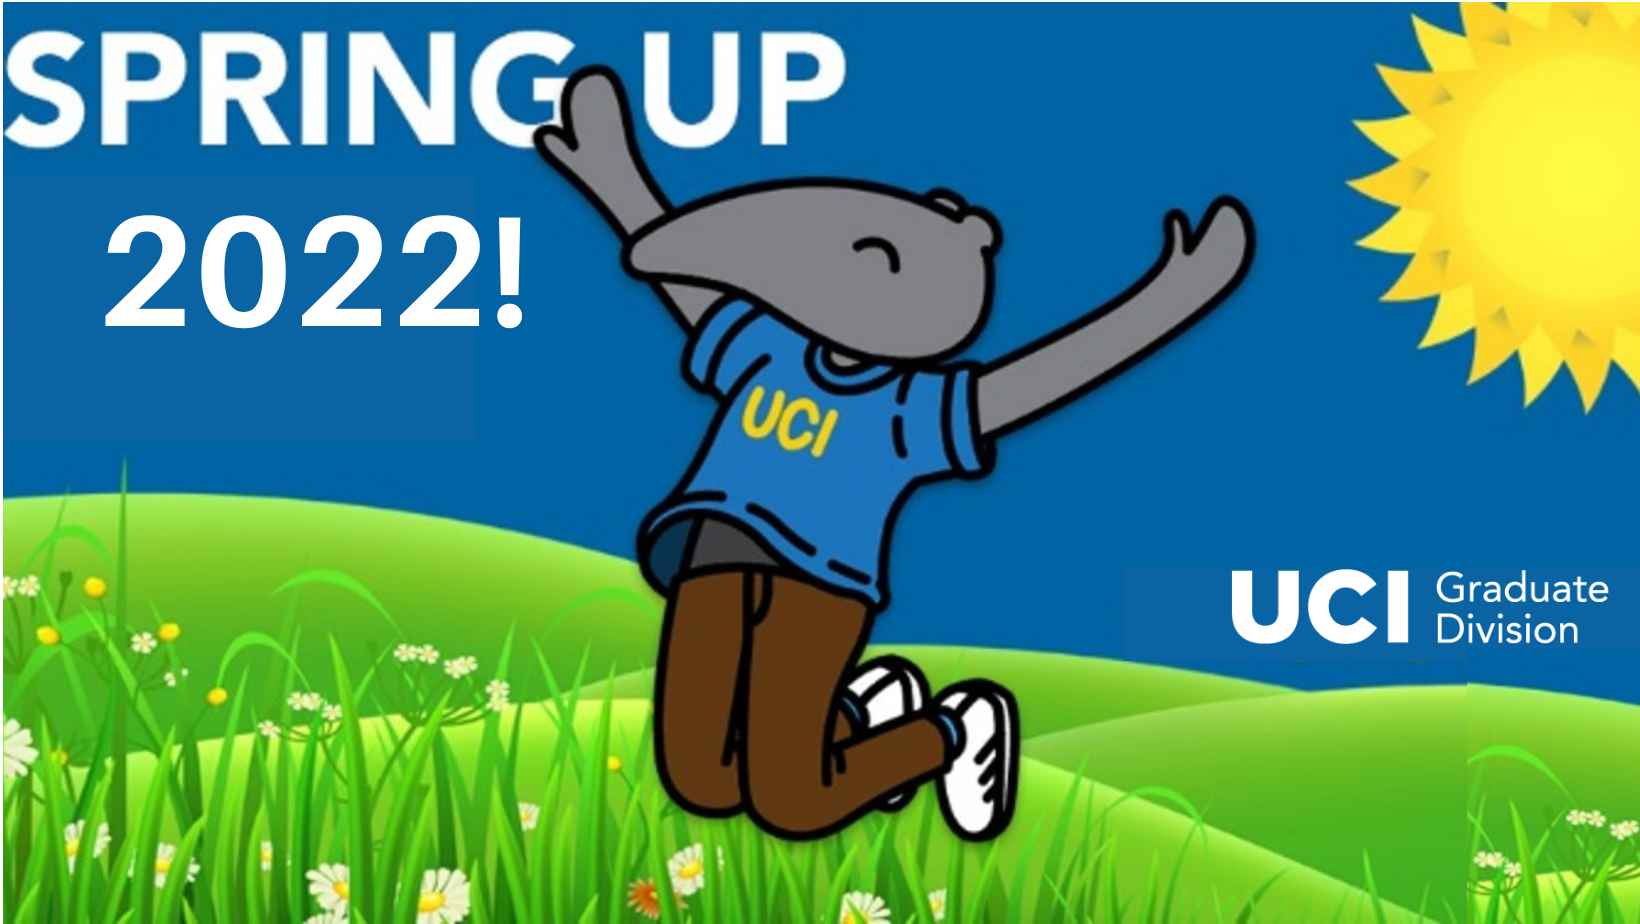 Event Logo. Peter Anteater jumping with a sunshine in the background.